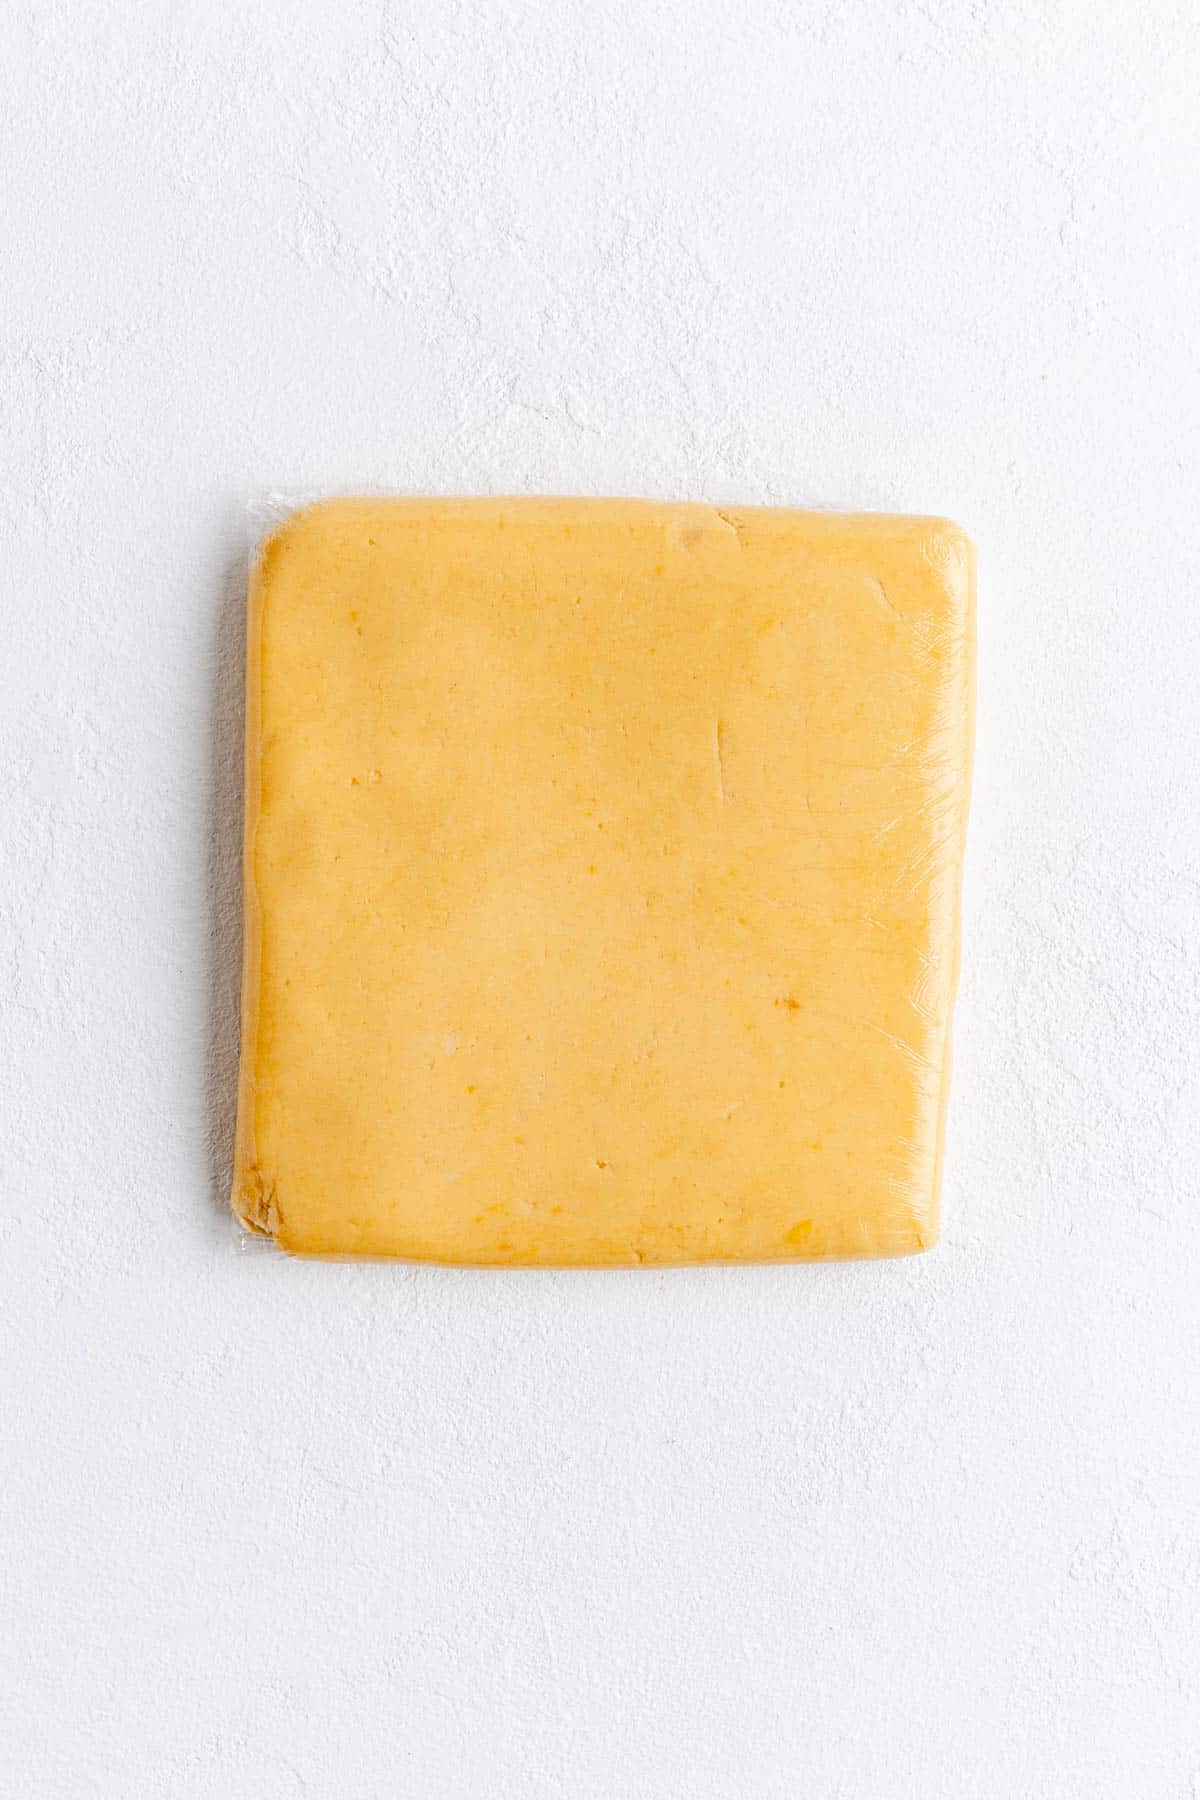 shorbread cookie dough rolled wrapped in plastic wrap in a square shape on white background.